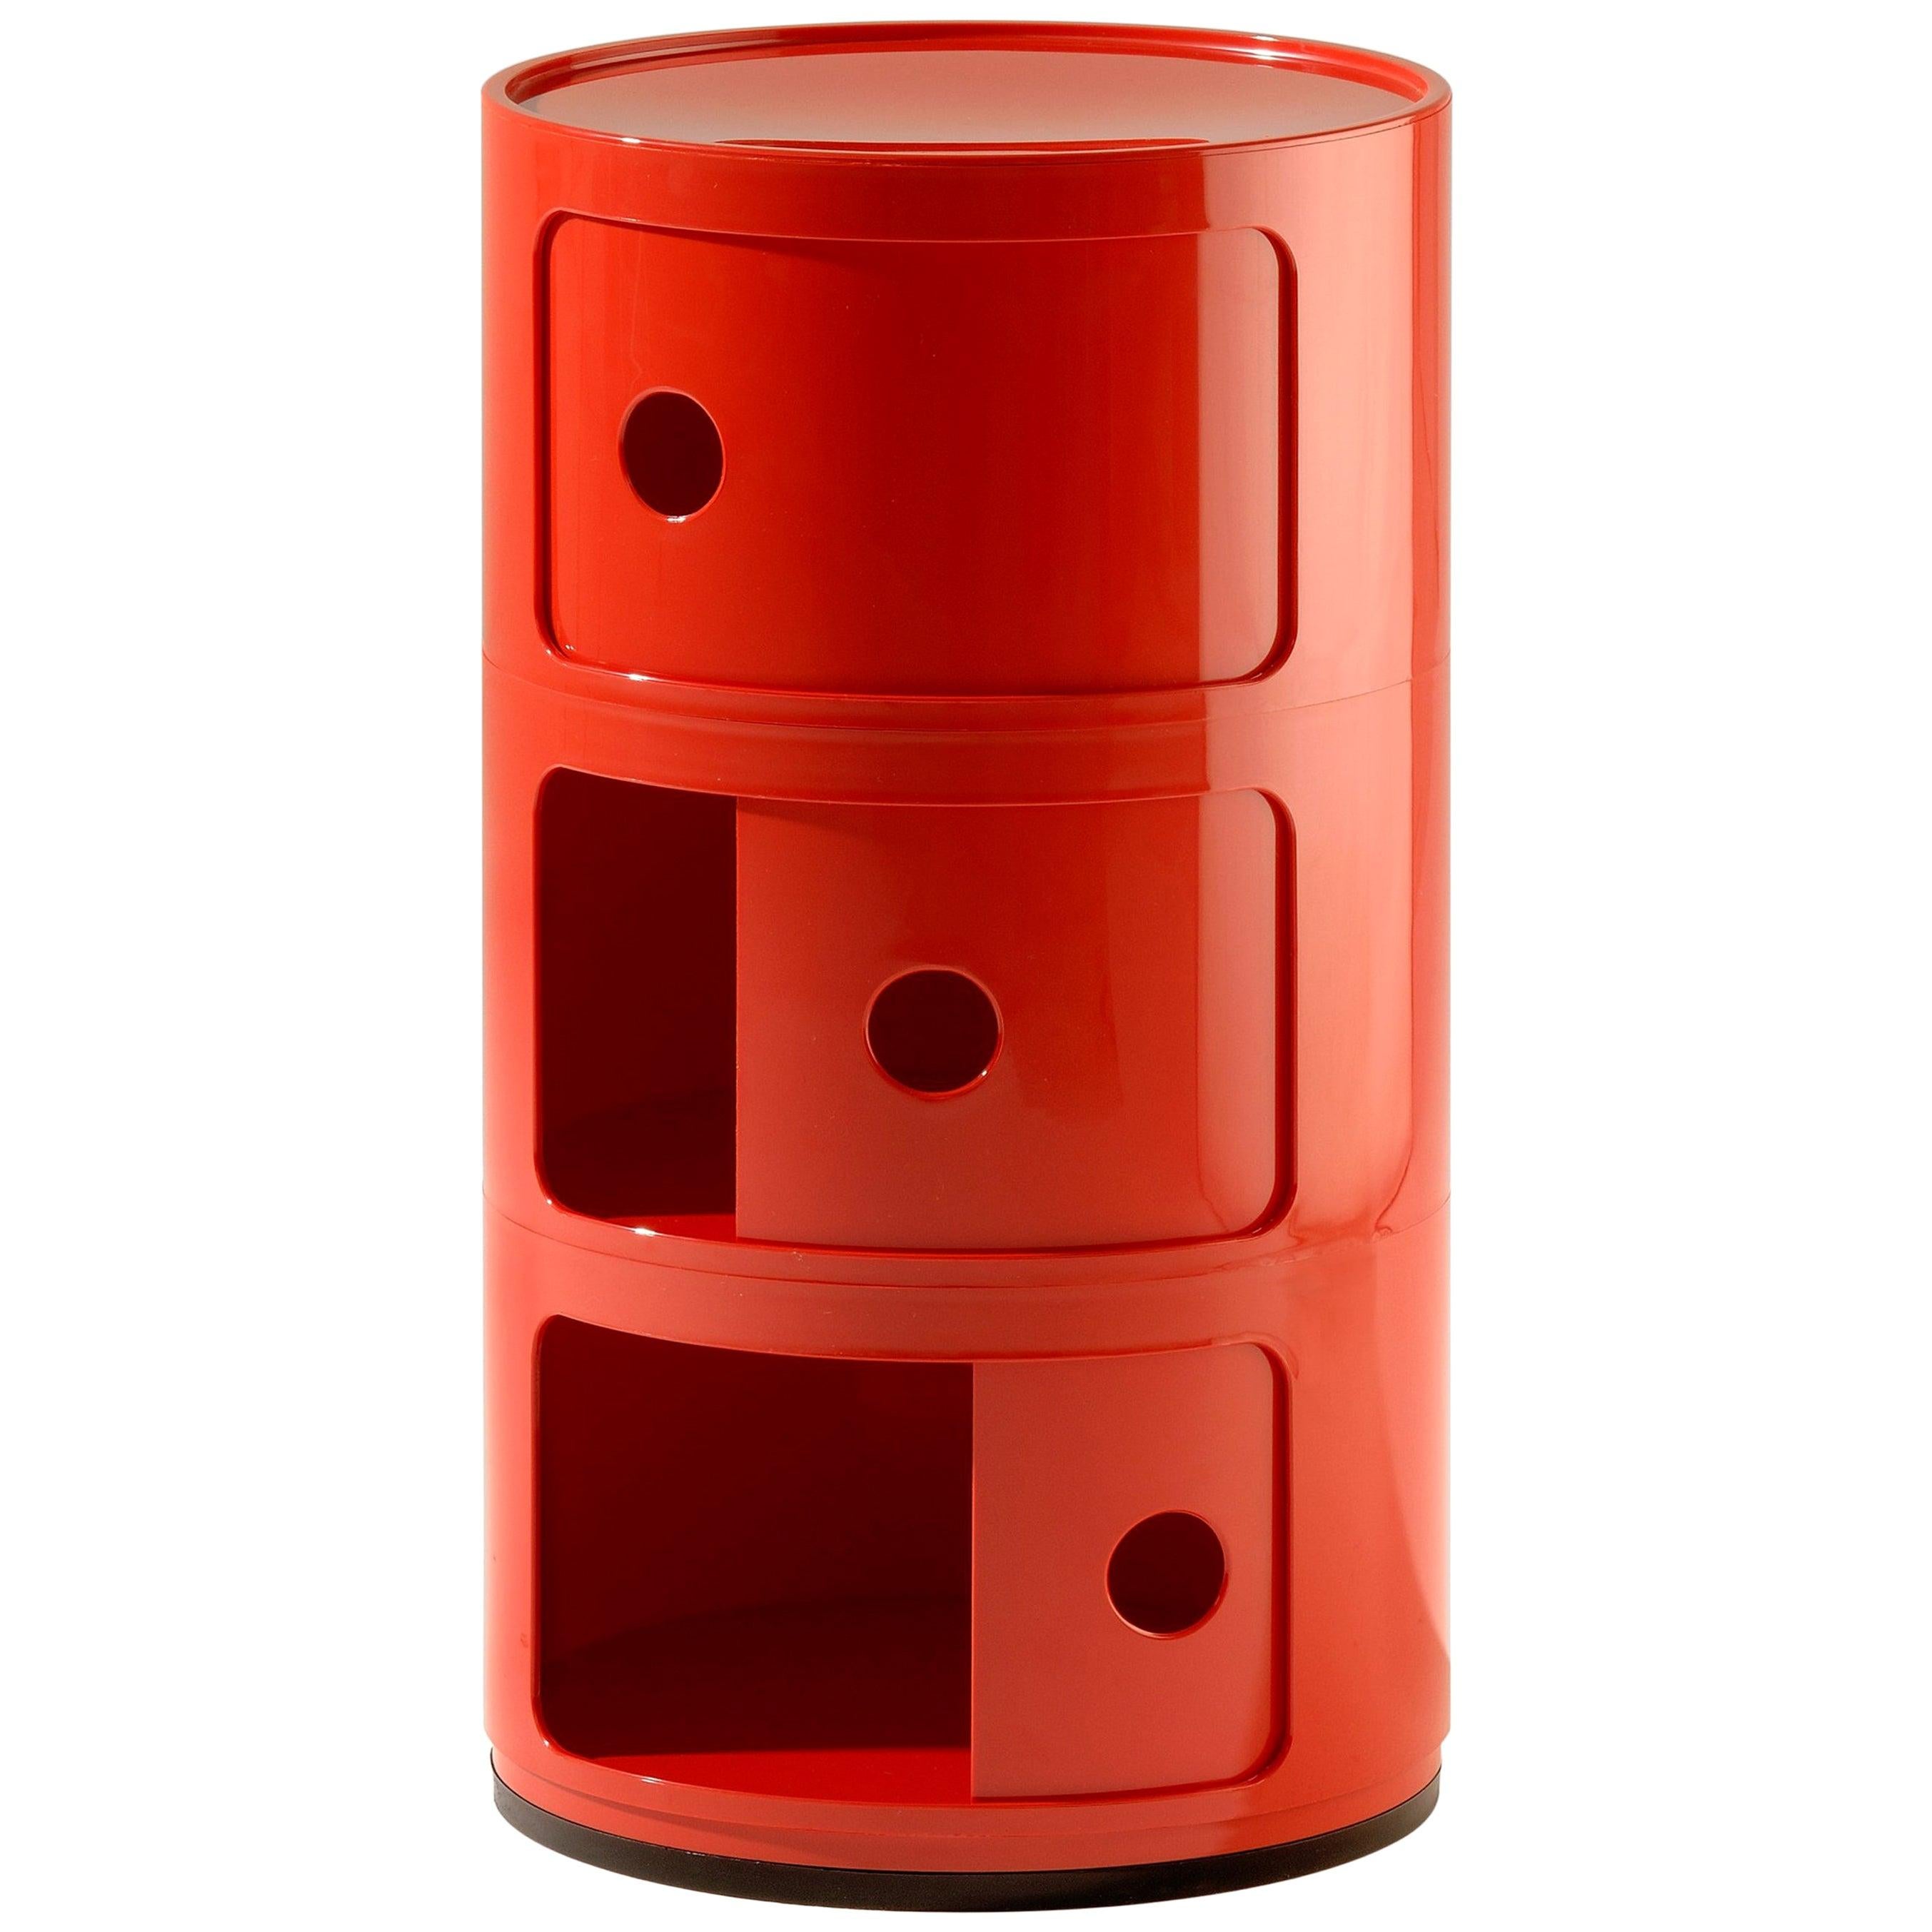 Kartell Componibili 3-Tier Drawer in Red by Anna Castelli Ferrieri For Sale